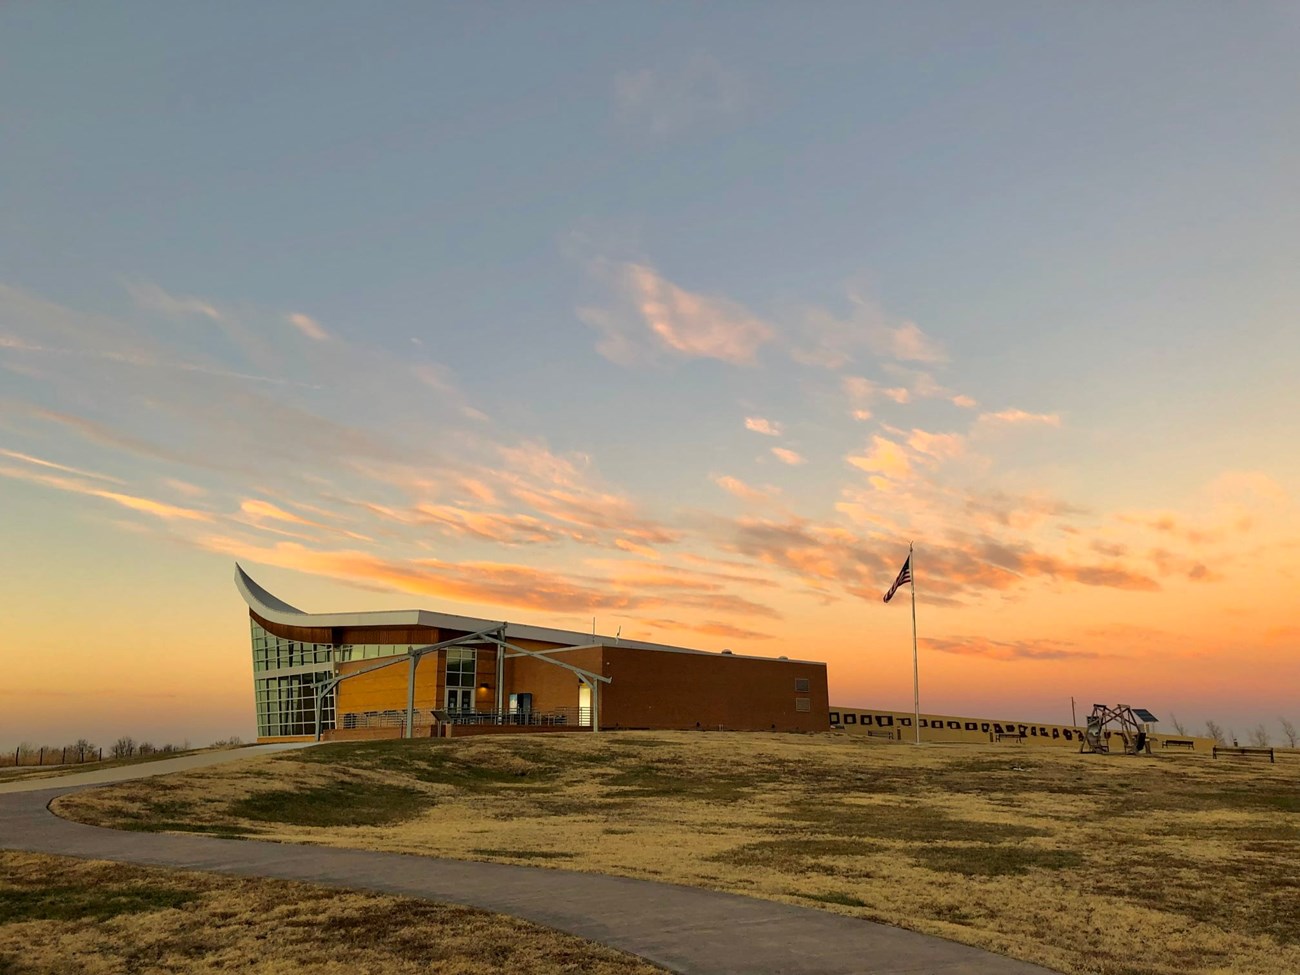 The plow shaped visitor center is in the foreground. A pale pink sky can be seen behind it as the sunsets.